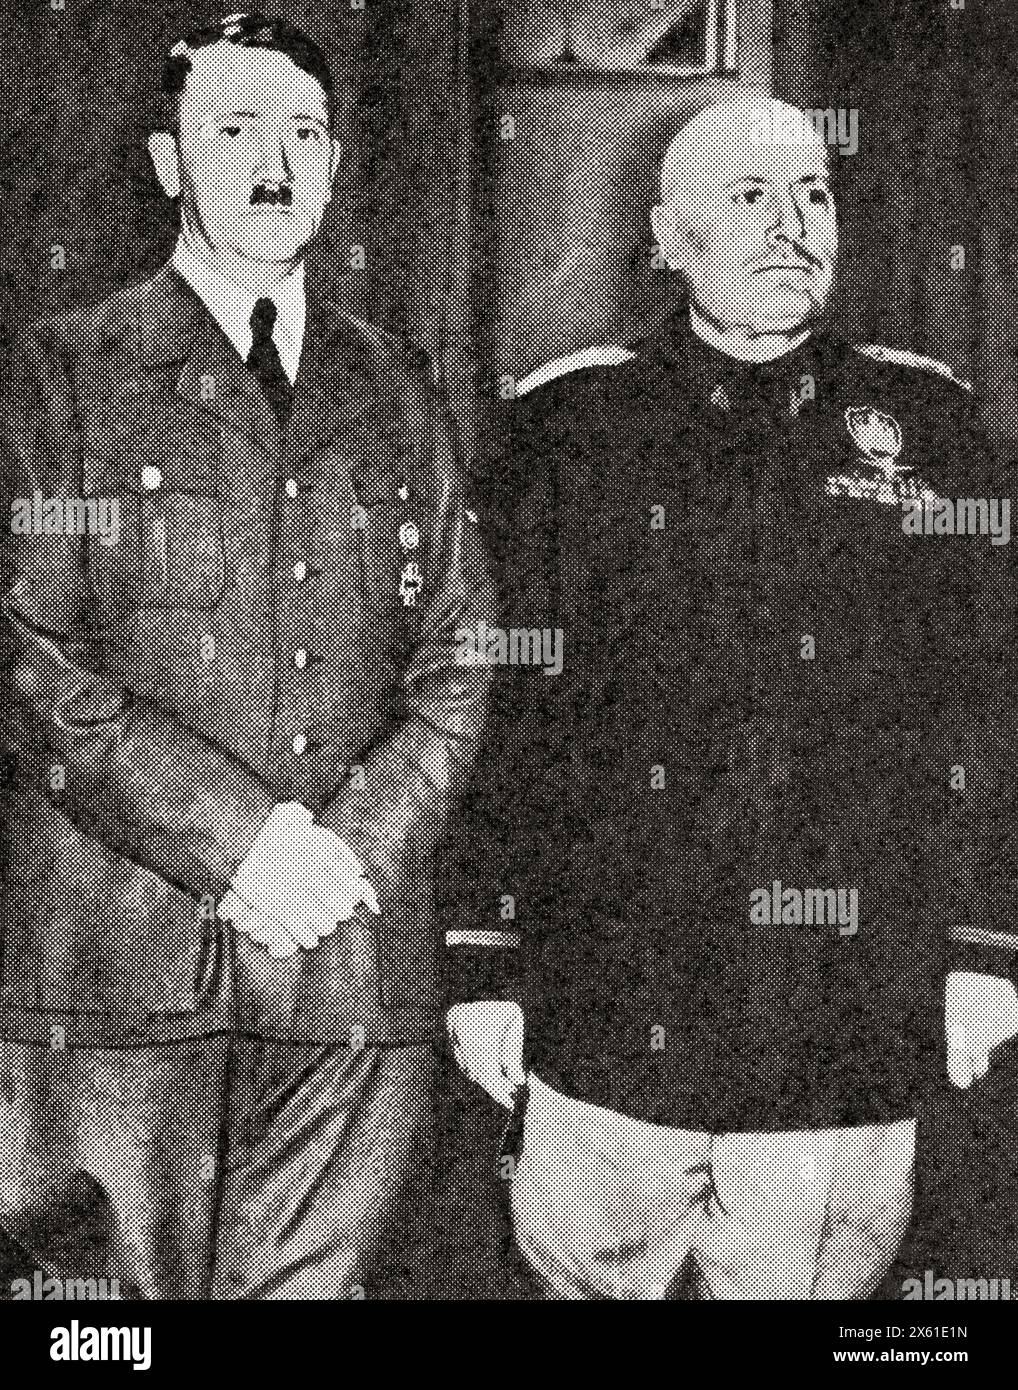 Hitler's meeting with Mussolini in an attempt to gain new allies, 23-28 October, 1940.  Adolf Hitler, 1889 – 1945. German politician, demagogue, Pan-German revolutionary, leader of the Nazi Party, Chancellor of Germany, and Führer of Nazi Germany from 1934 to 1945. Benito Amilcare Andrea Mussolini, 1883 – 1945. Italian dictator, journalist, founder and leader of the National Fascist Party (PNF), and Prime Minister of Italy.  From The War in Pictures, Sixth Year. Stock Photo